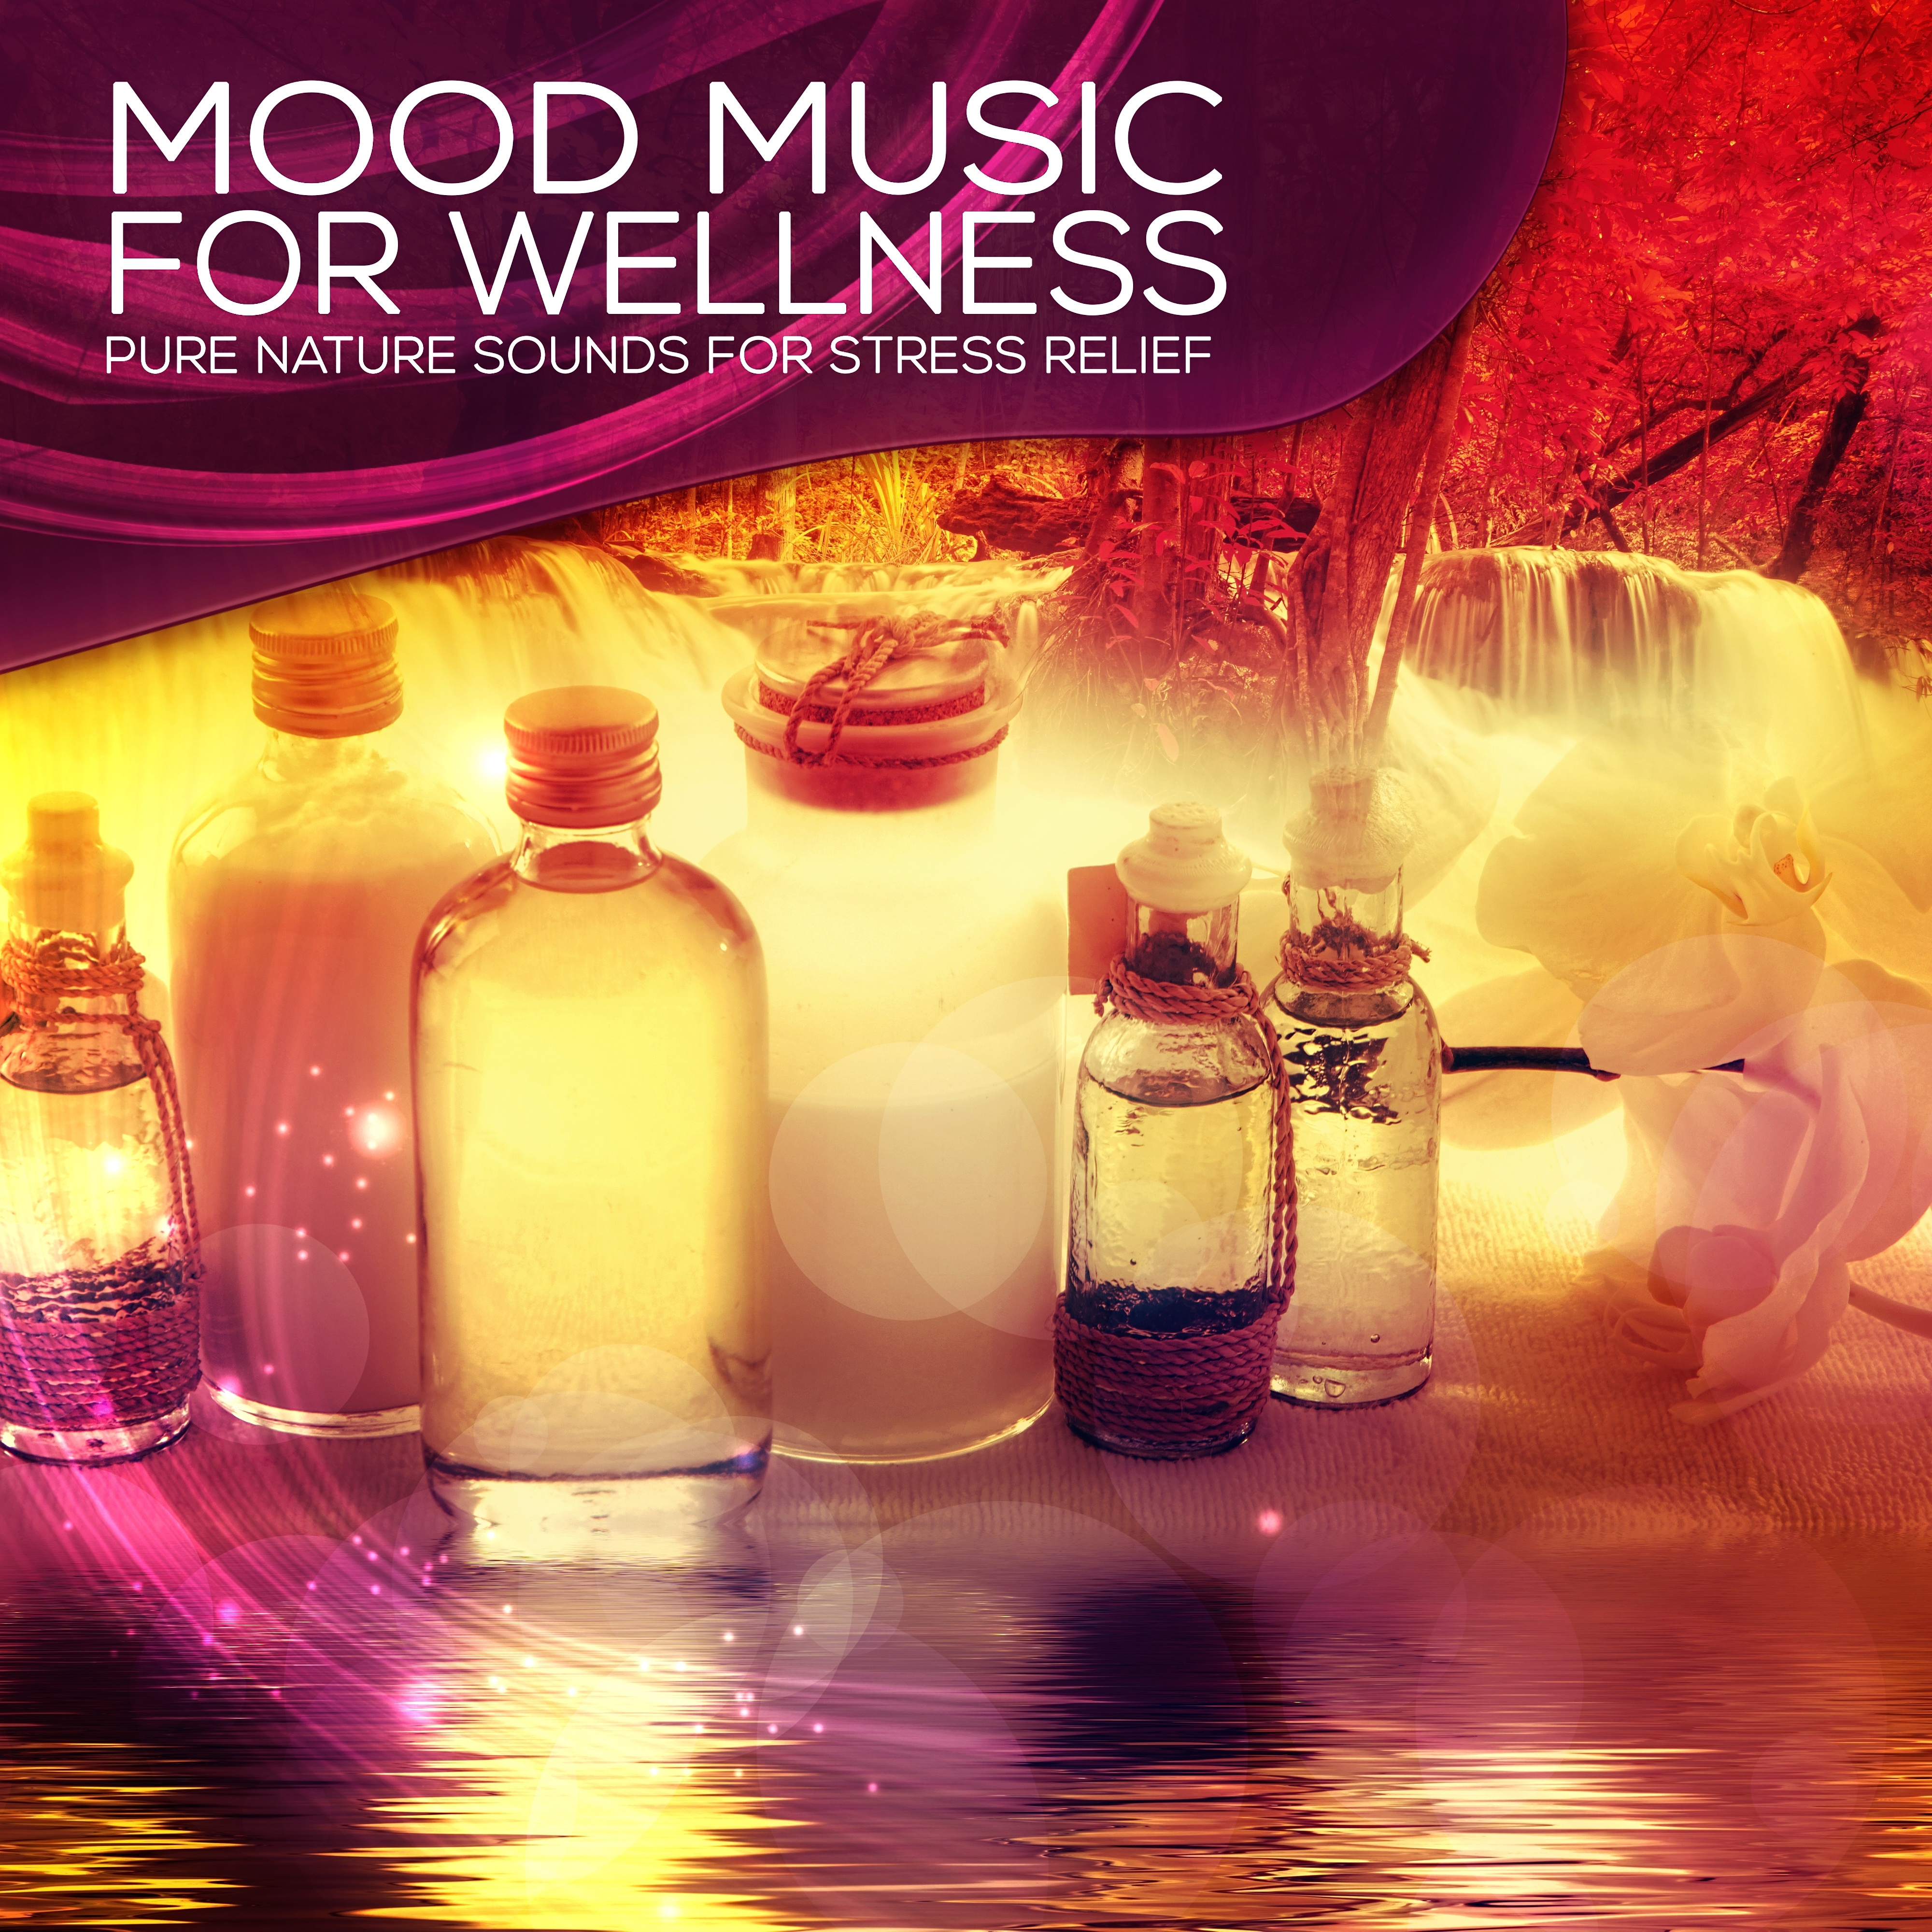 Mood Music for Wellness - Music and Pure Nature Sounds for Stress Relief, Harmony of Senses, Relaxing Background Music for Spa the Wellness Center, Sensual Massage Music for Aromatherapy